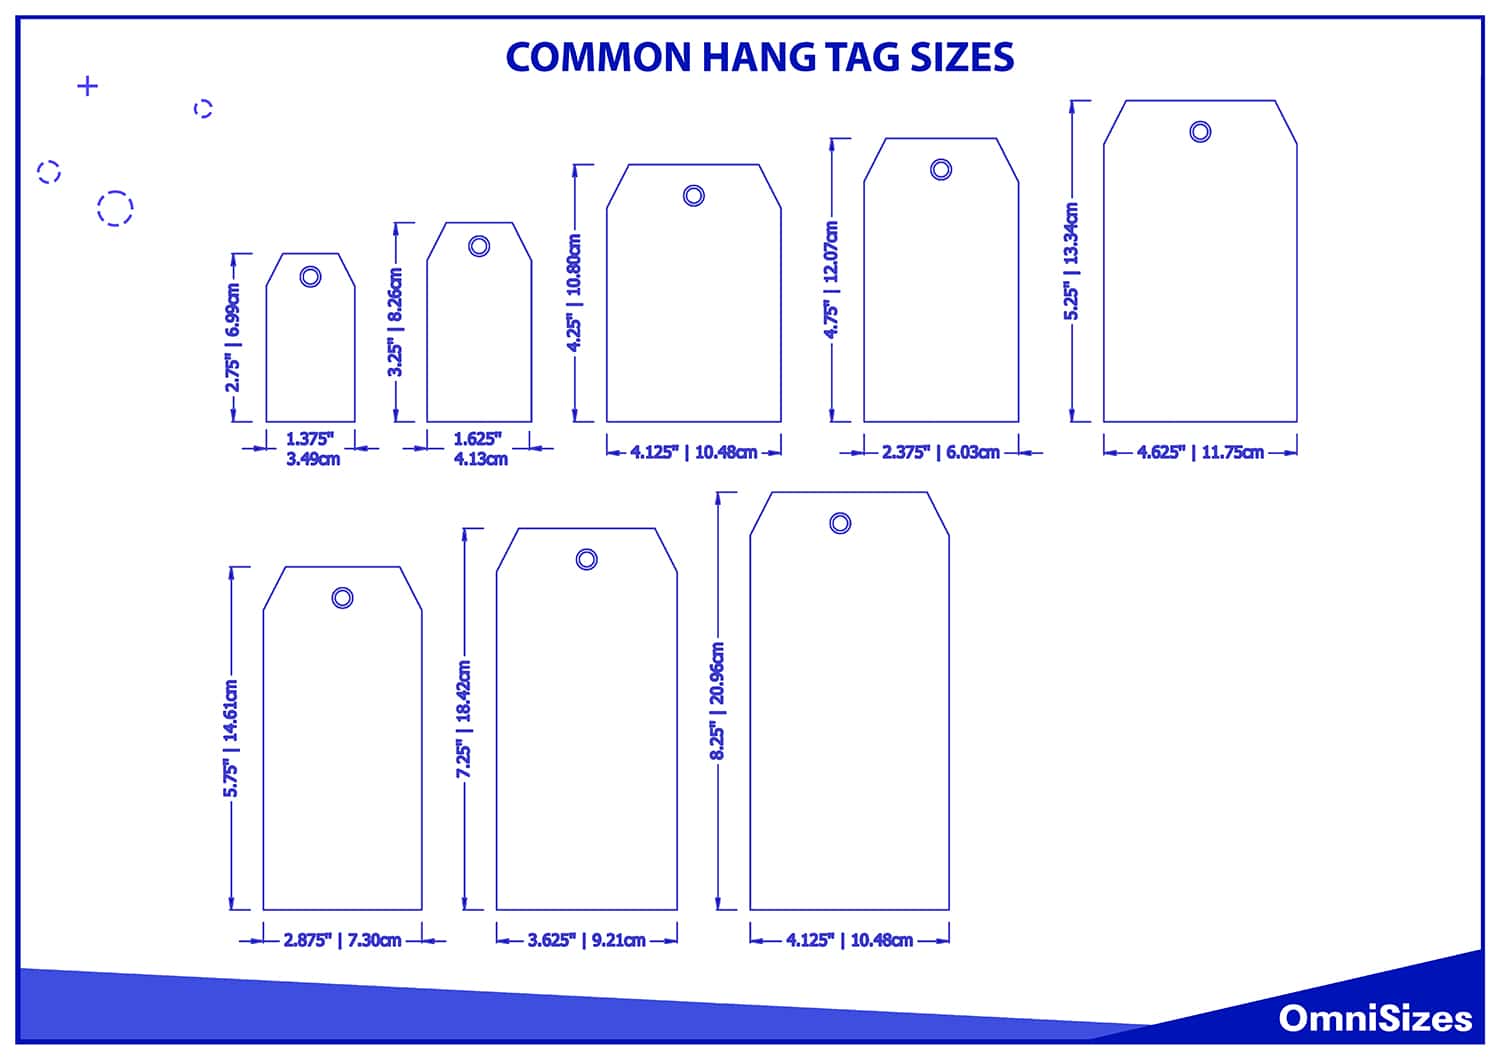 Common hang tag sizes